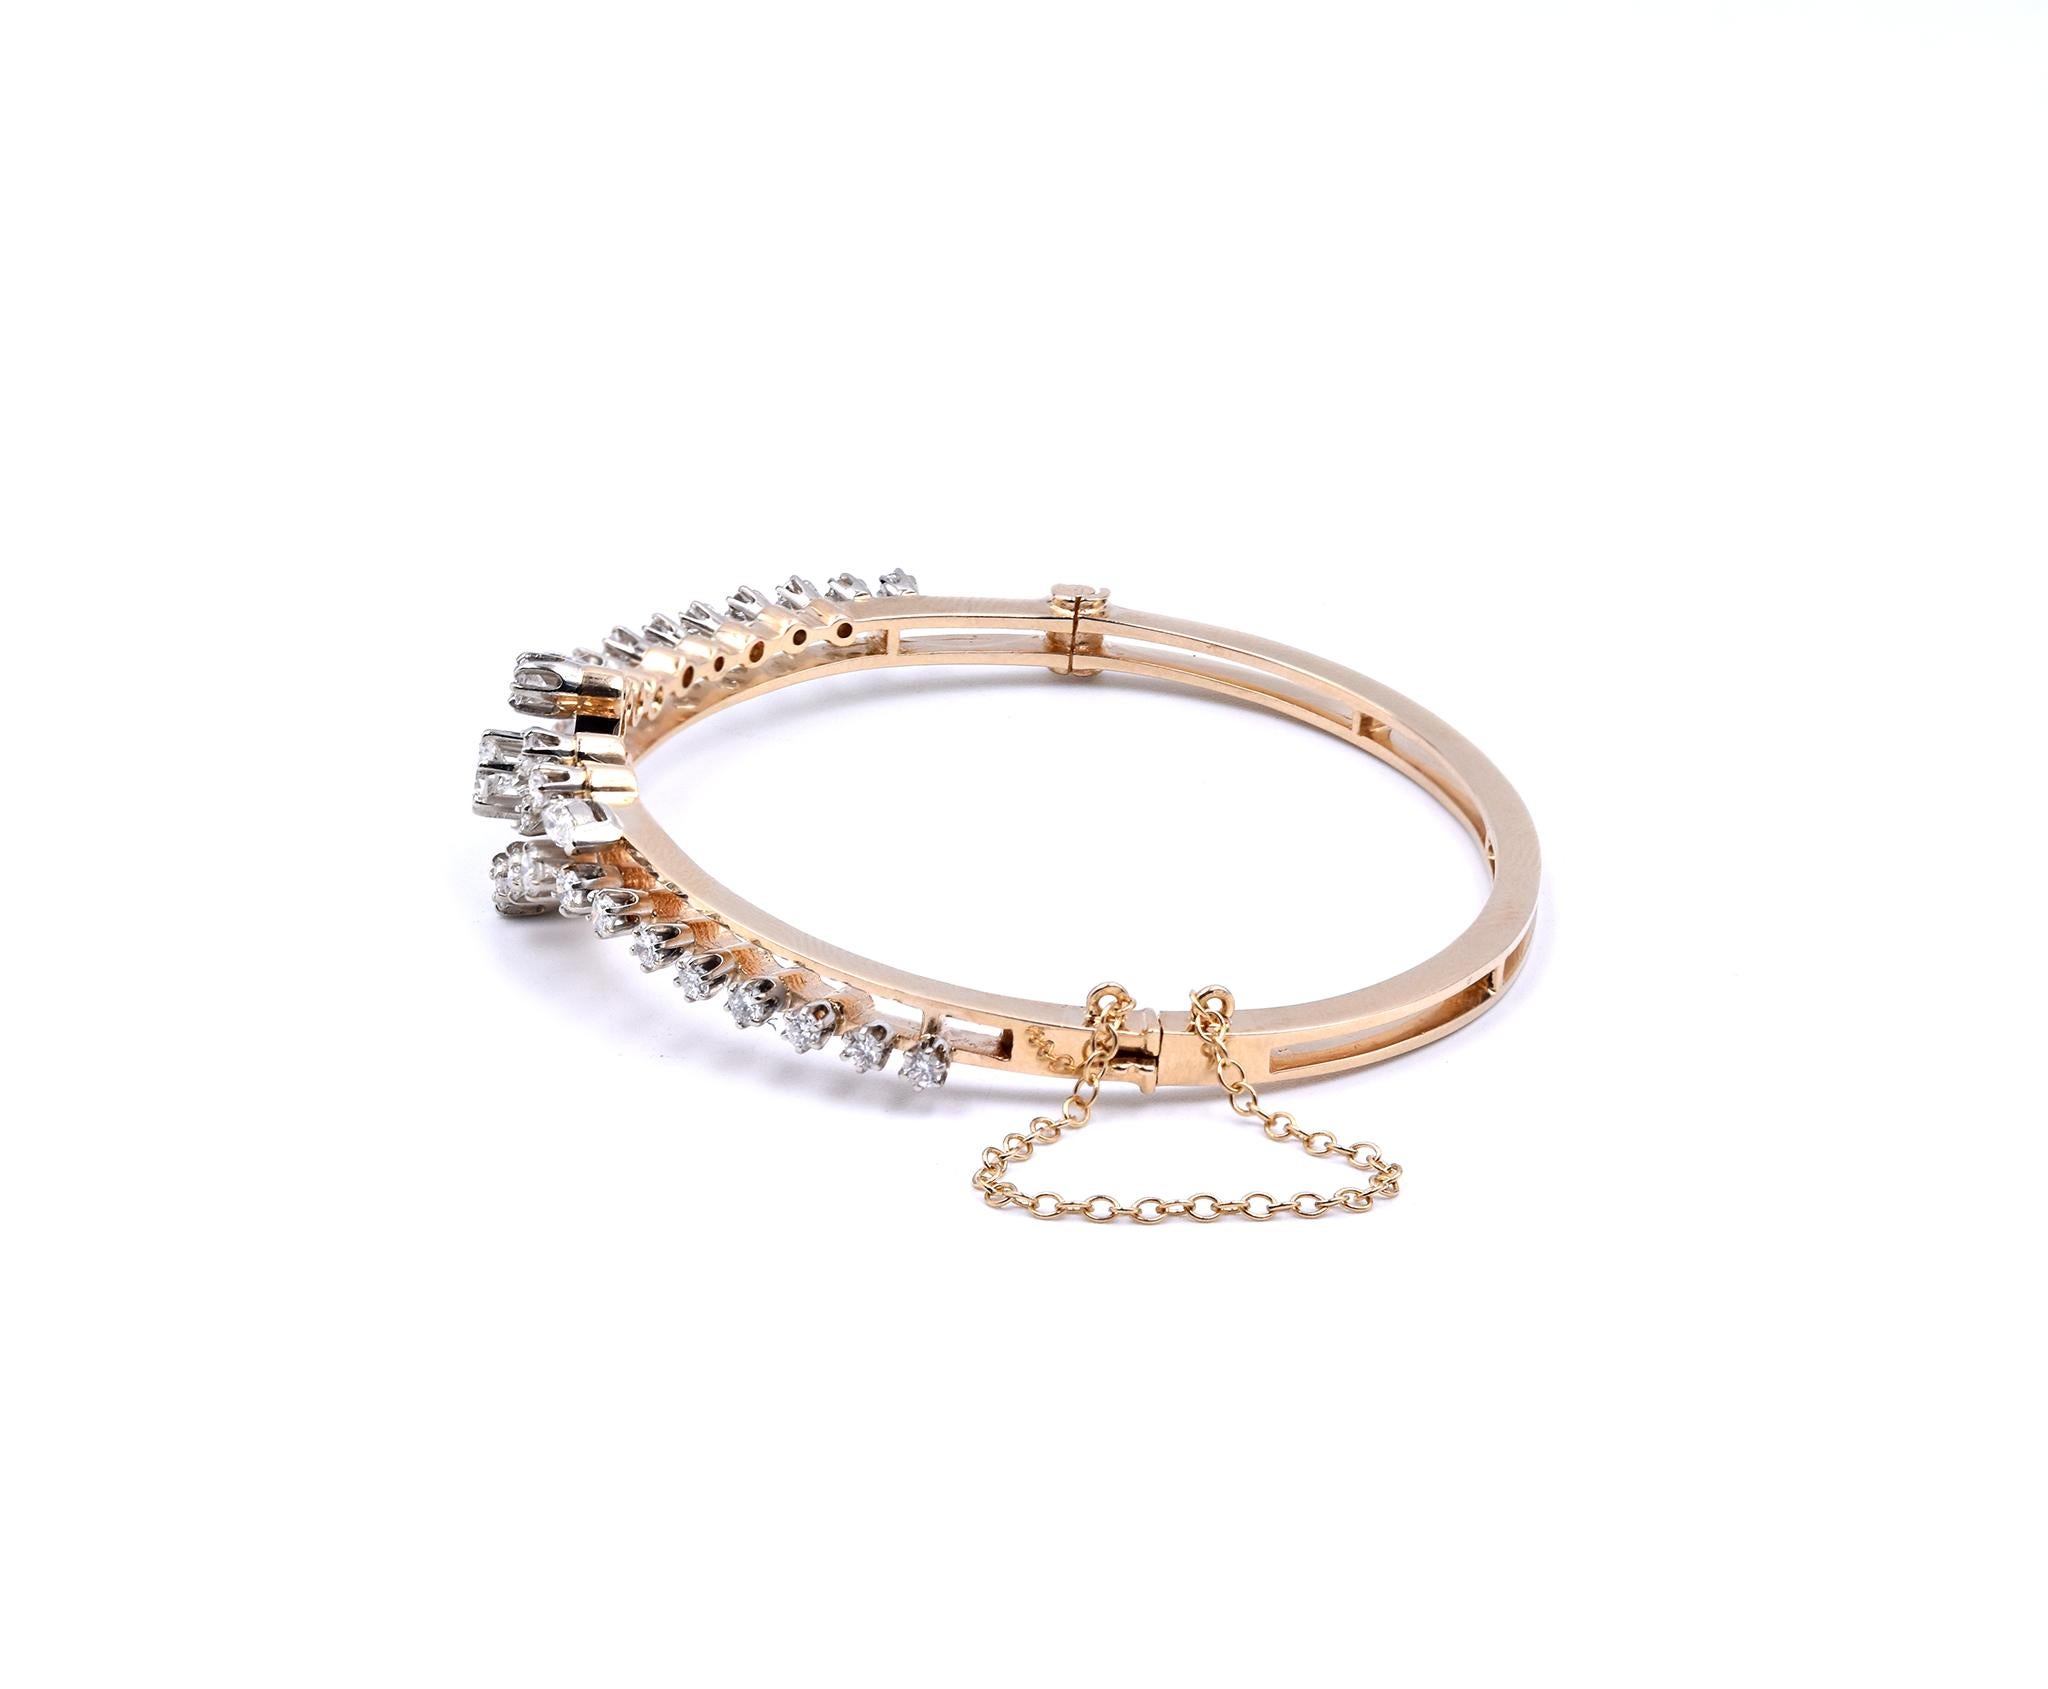 Material: 14K yellow gold
Diamonds: 29 round & 2 marquise cut = 1.25cttw
Color: H/I
Clarity: SI1
Dimensions: bracelet will fit up to a 7-inch wrist
Weight: 17.46 grams
